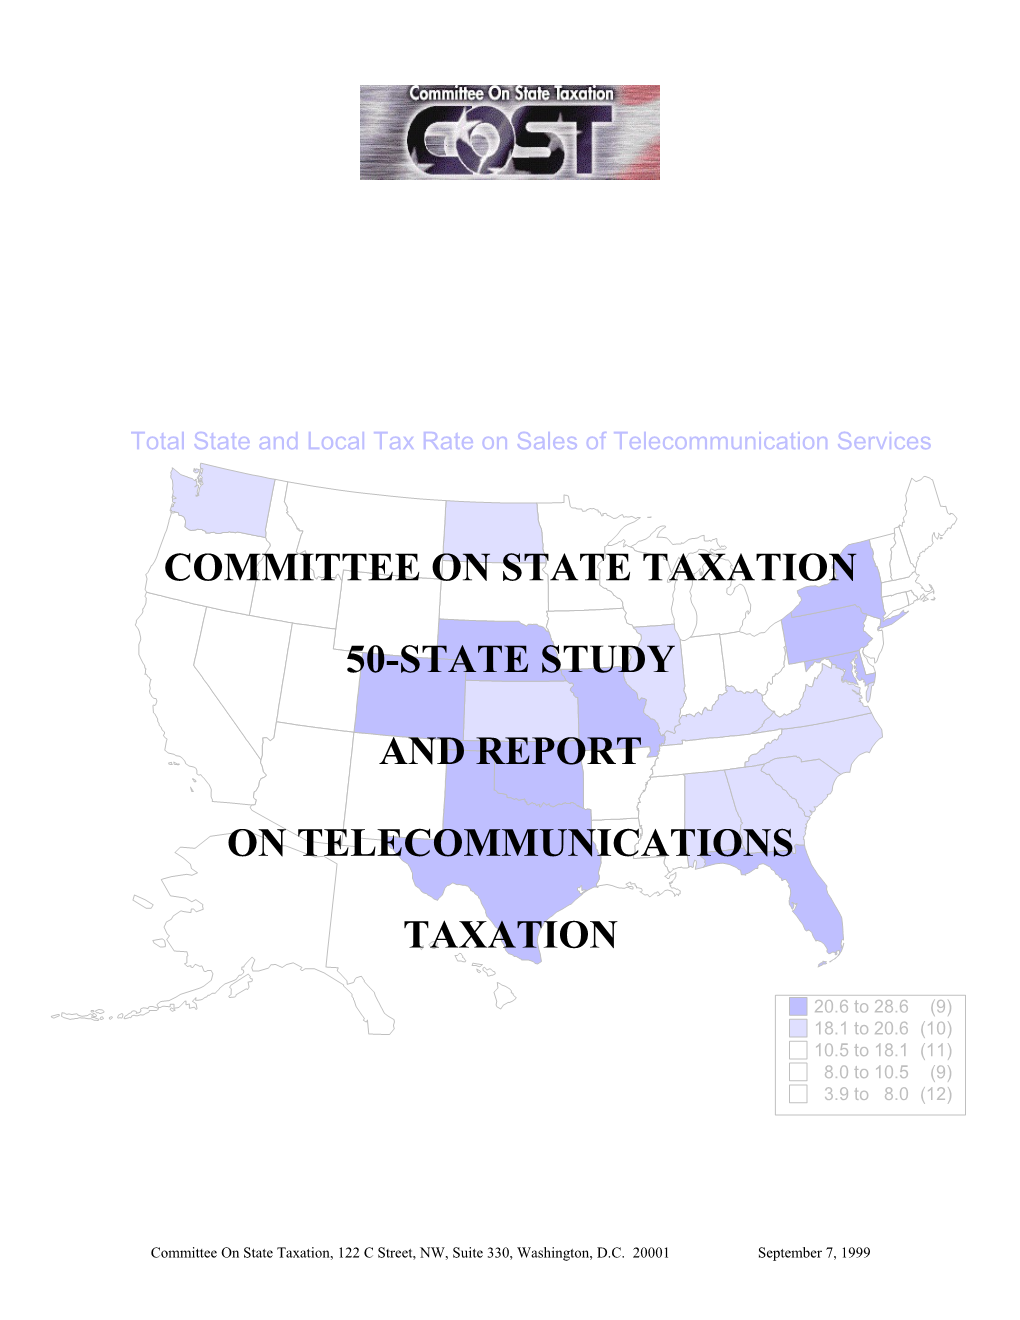 Committee on State Taxation